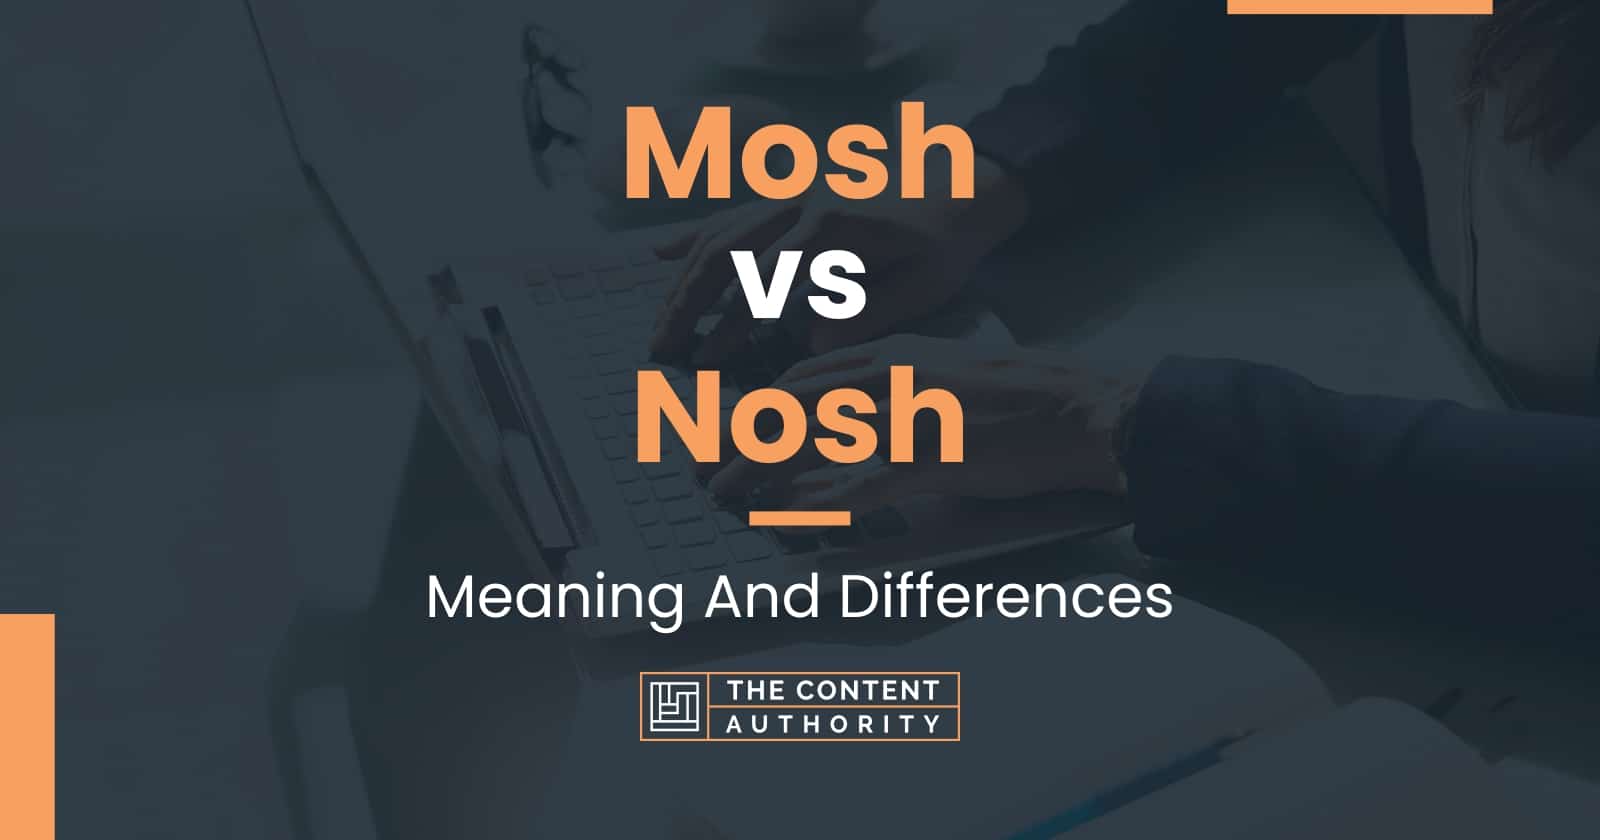 Mosh vs Nosh: Meaning And Differences